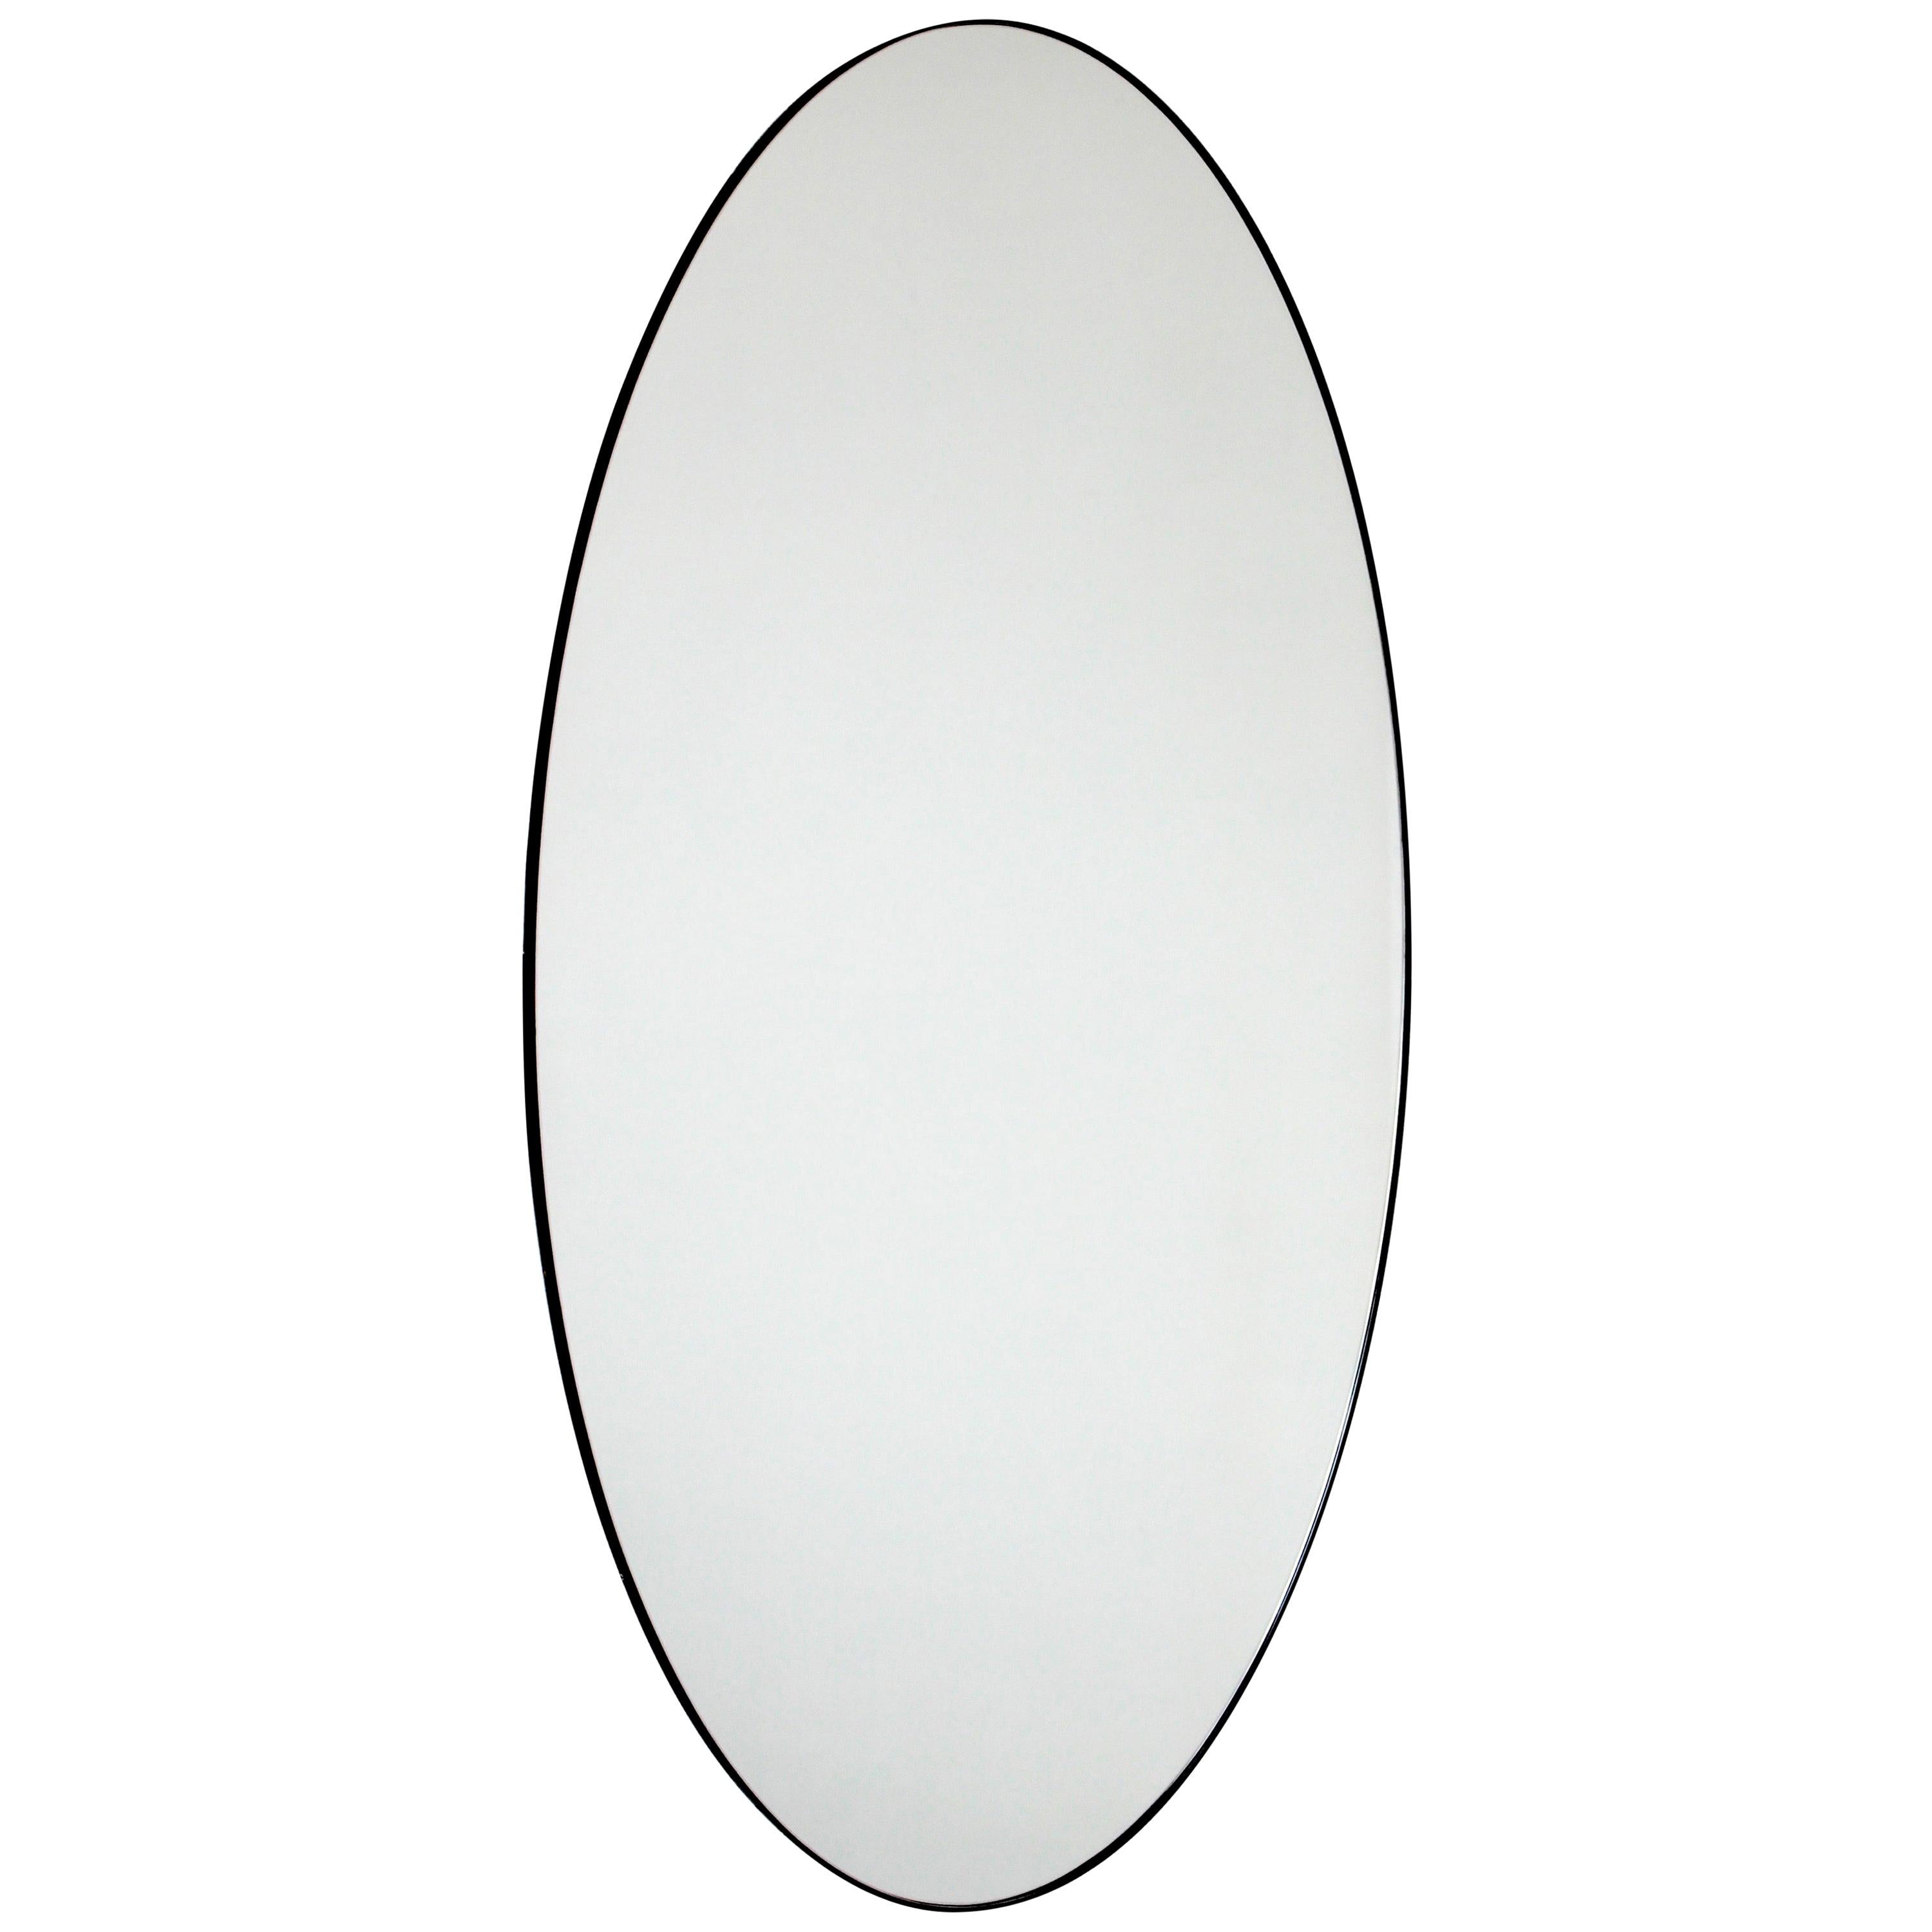 Delightful large oval mirror with a contemporary aluminium powder coated black frame. Designed and handcrafted in London, UK. 

Medium, large and extra-large (37cm x 56cm, 46cm x 71cm and 48cm x 97cm) mirrors are fitted with an ingenious French